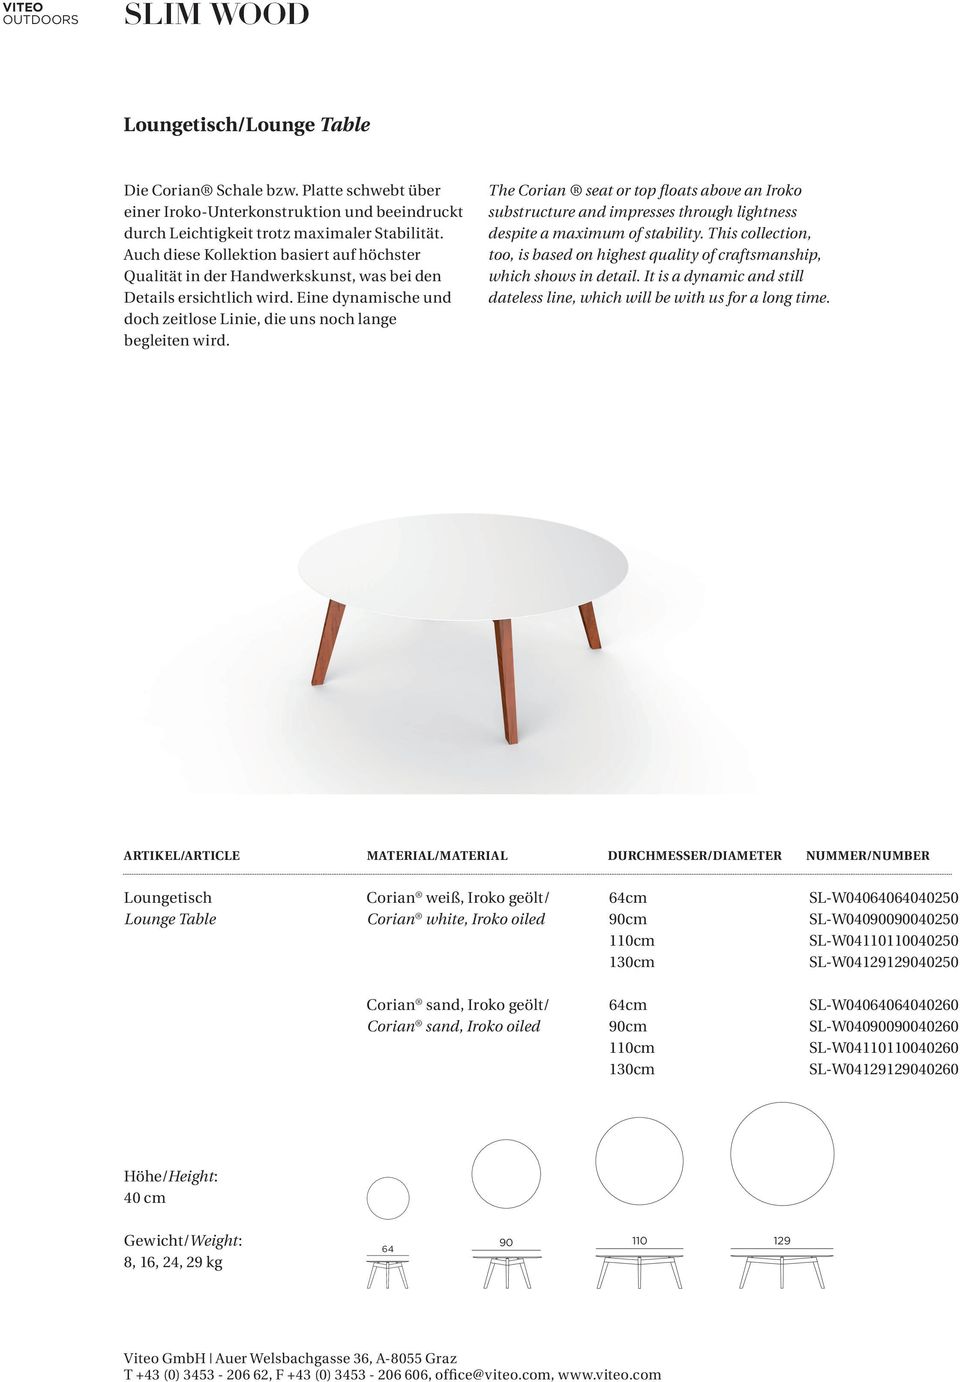 The Corian seat or top floats above an Iroko substructure and impresses through lightness despite a maximum of stability.